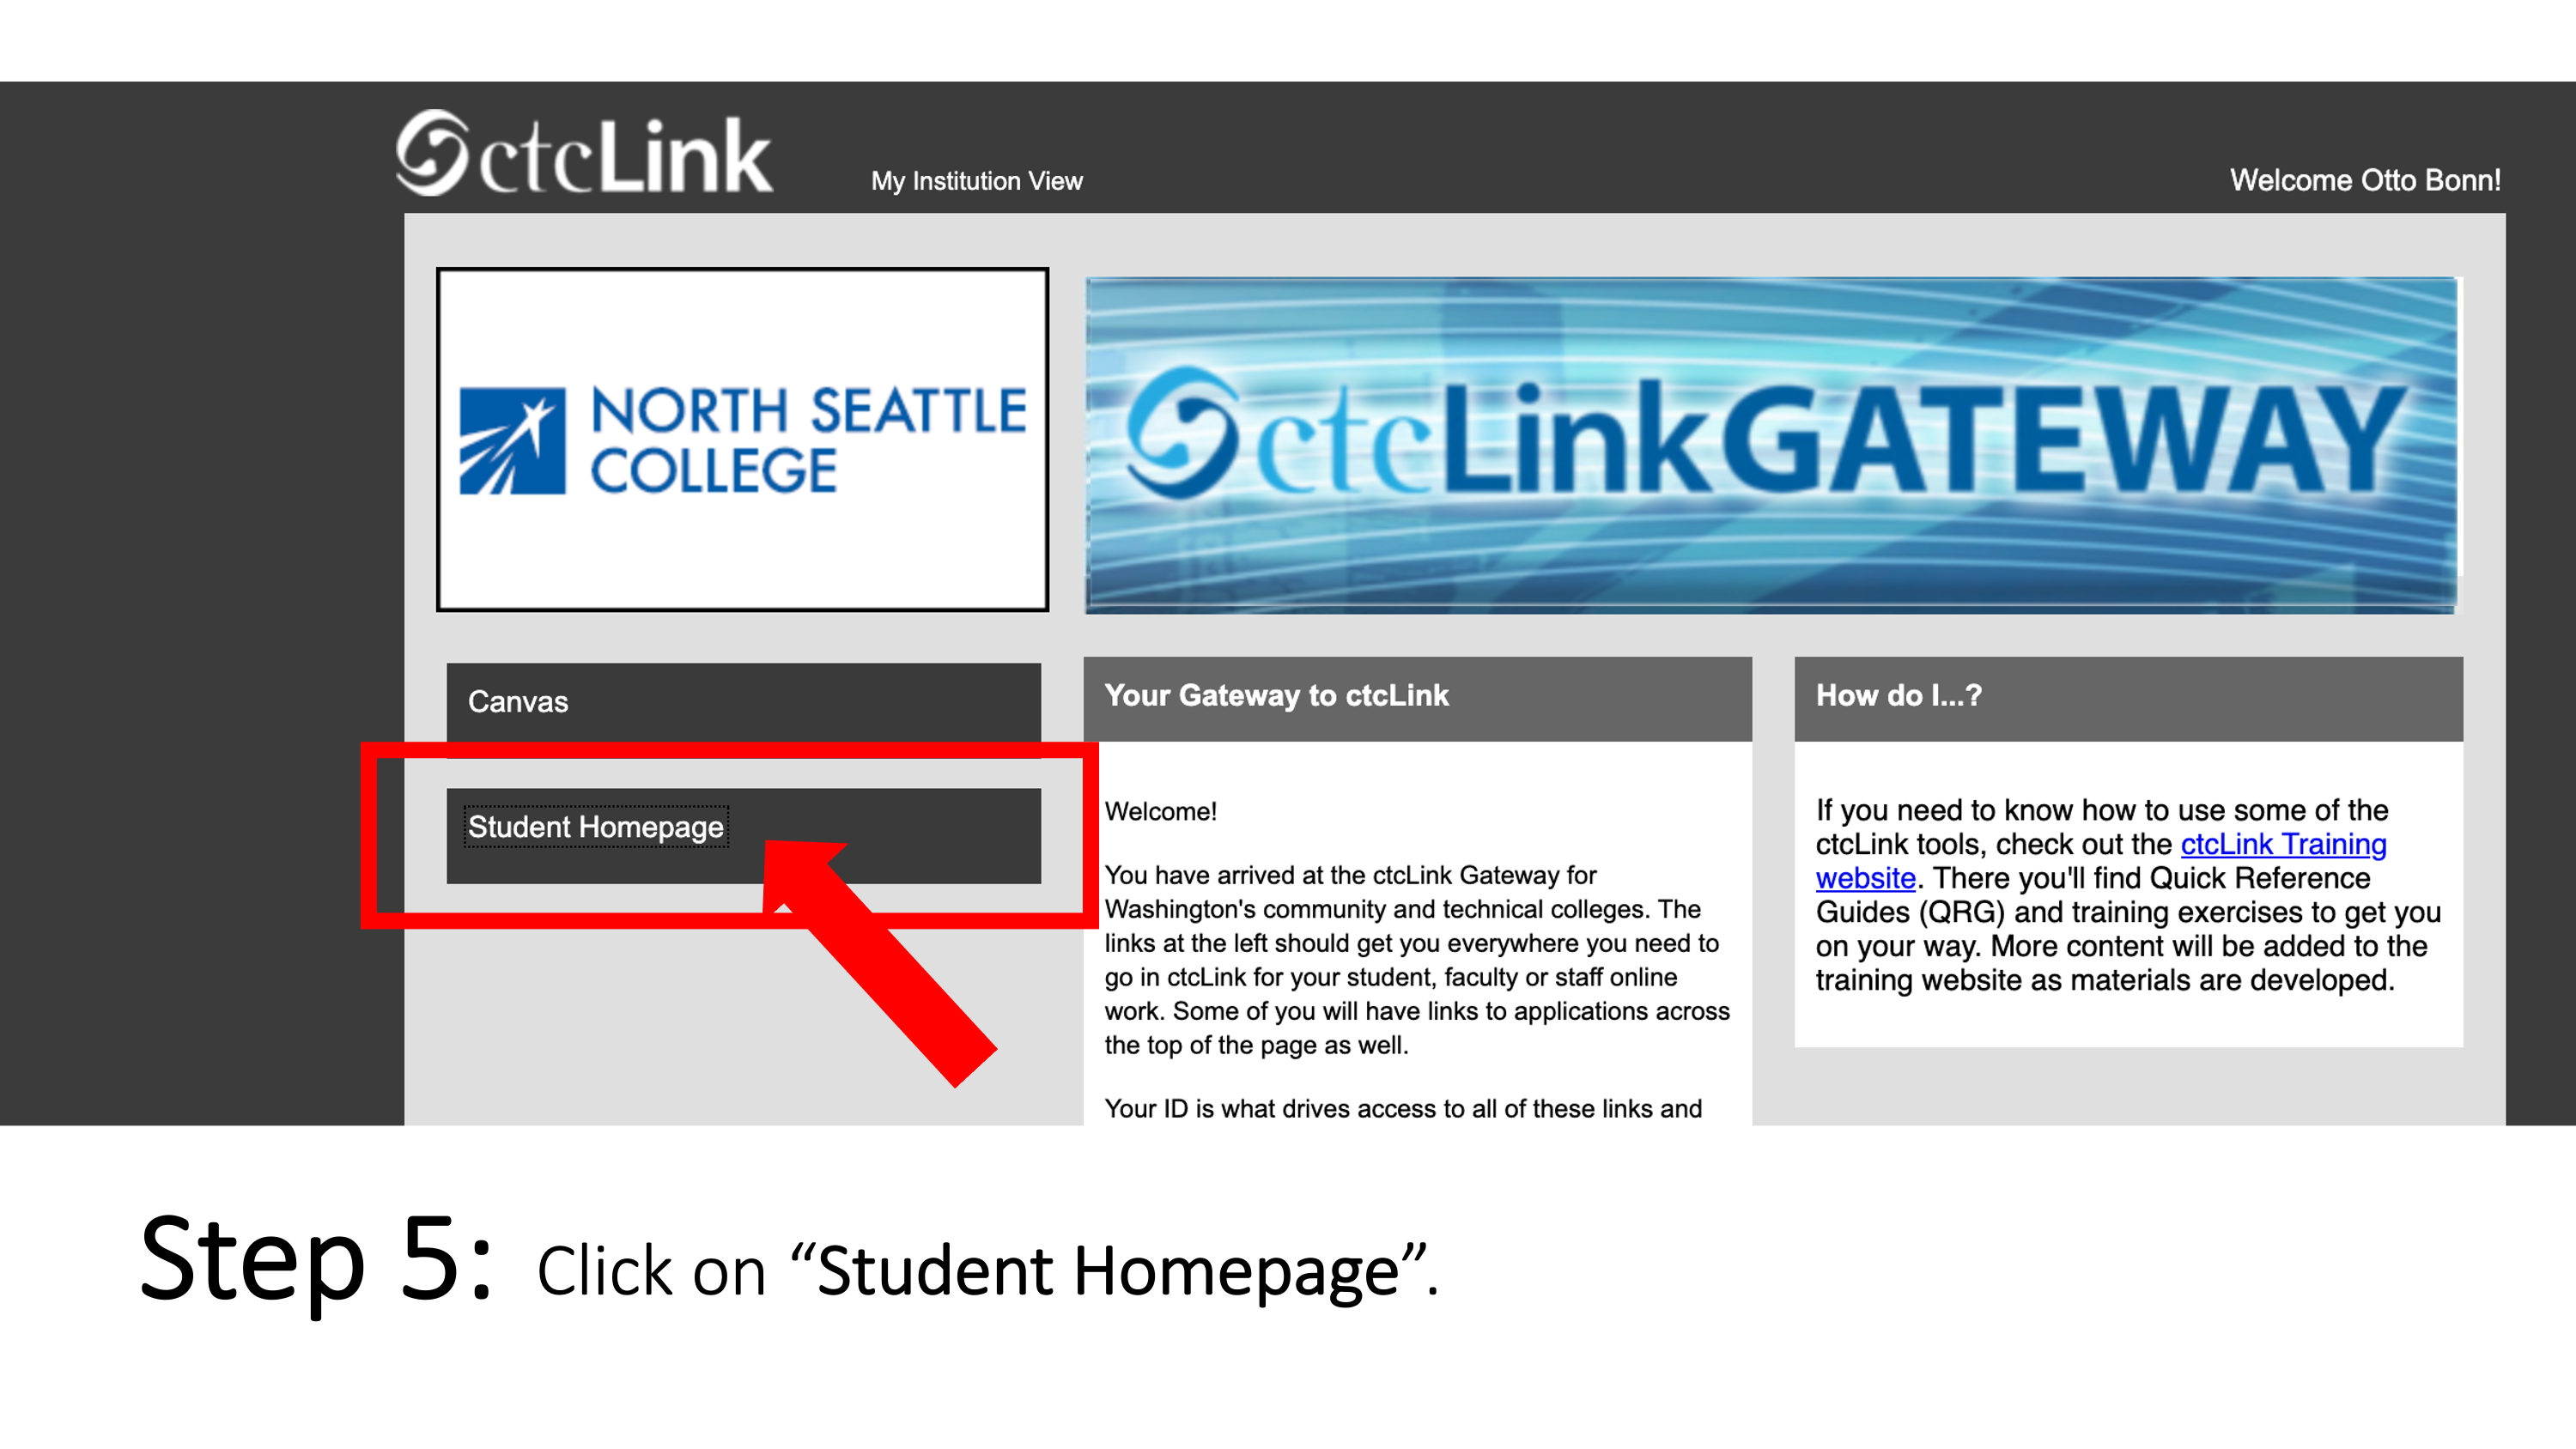 Click on “Student Homepage”.